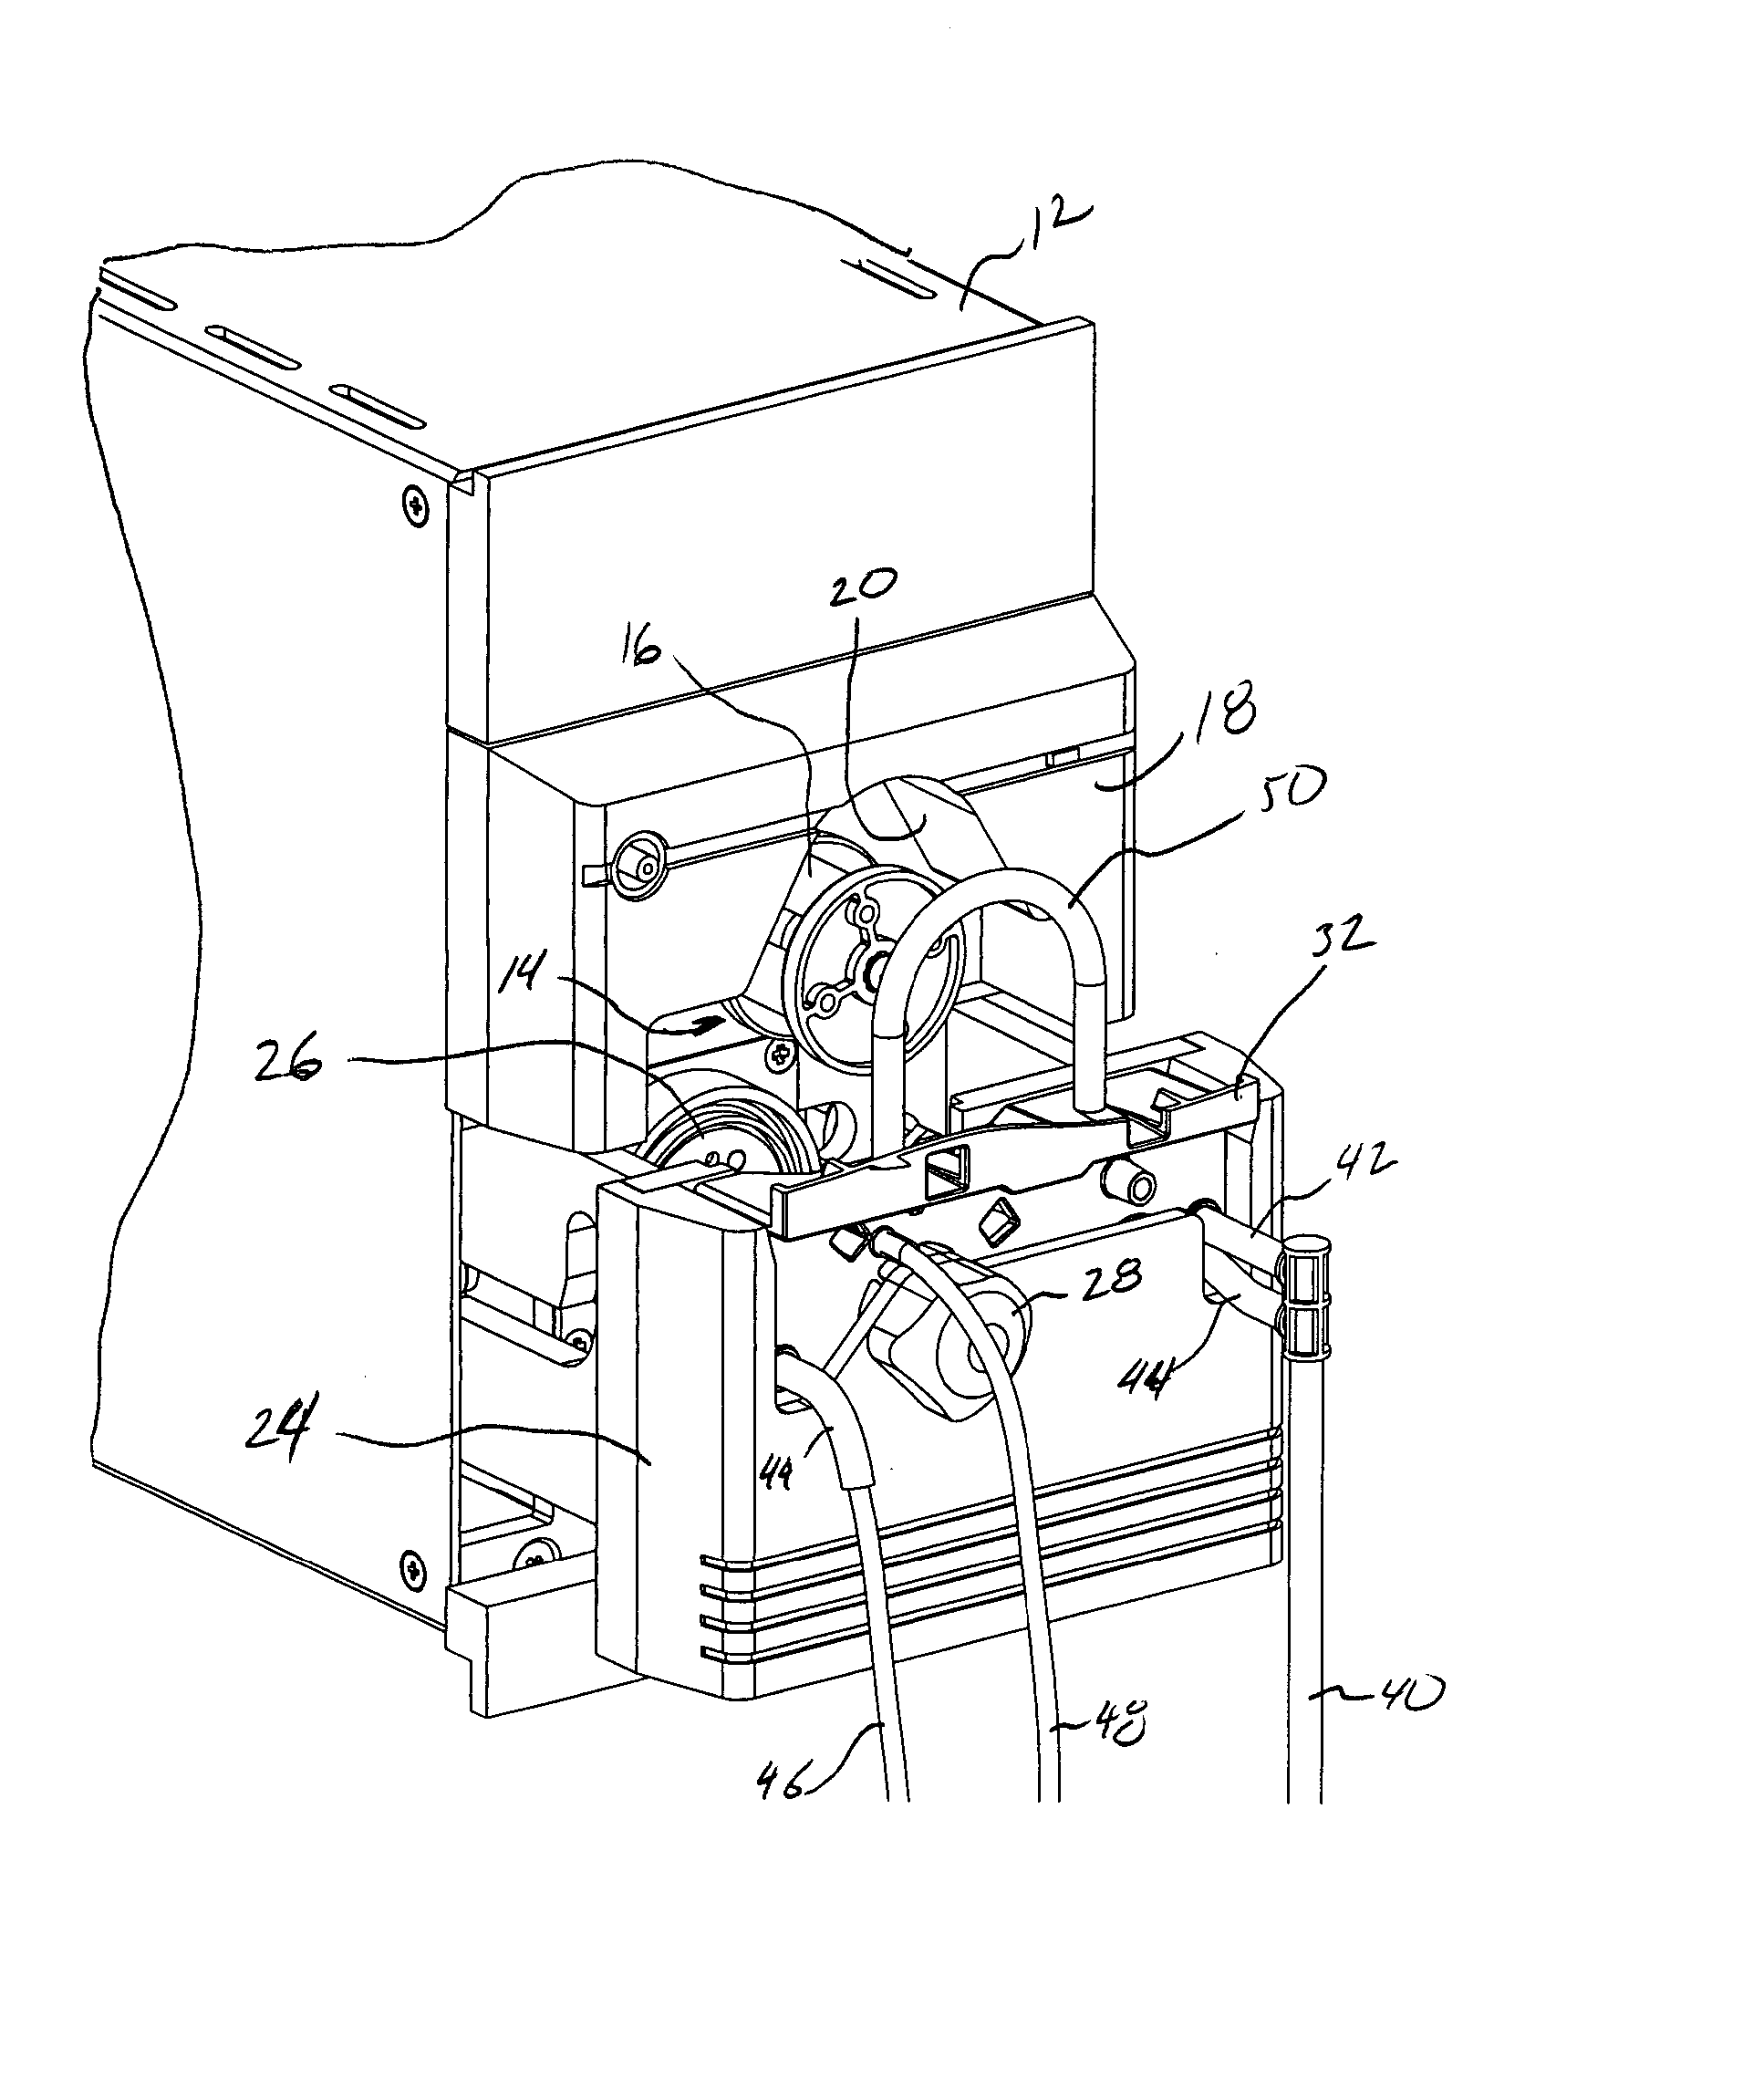 Peristaltic pump with a moveable pump head